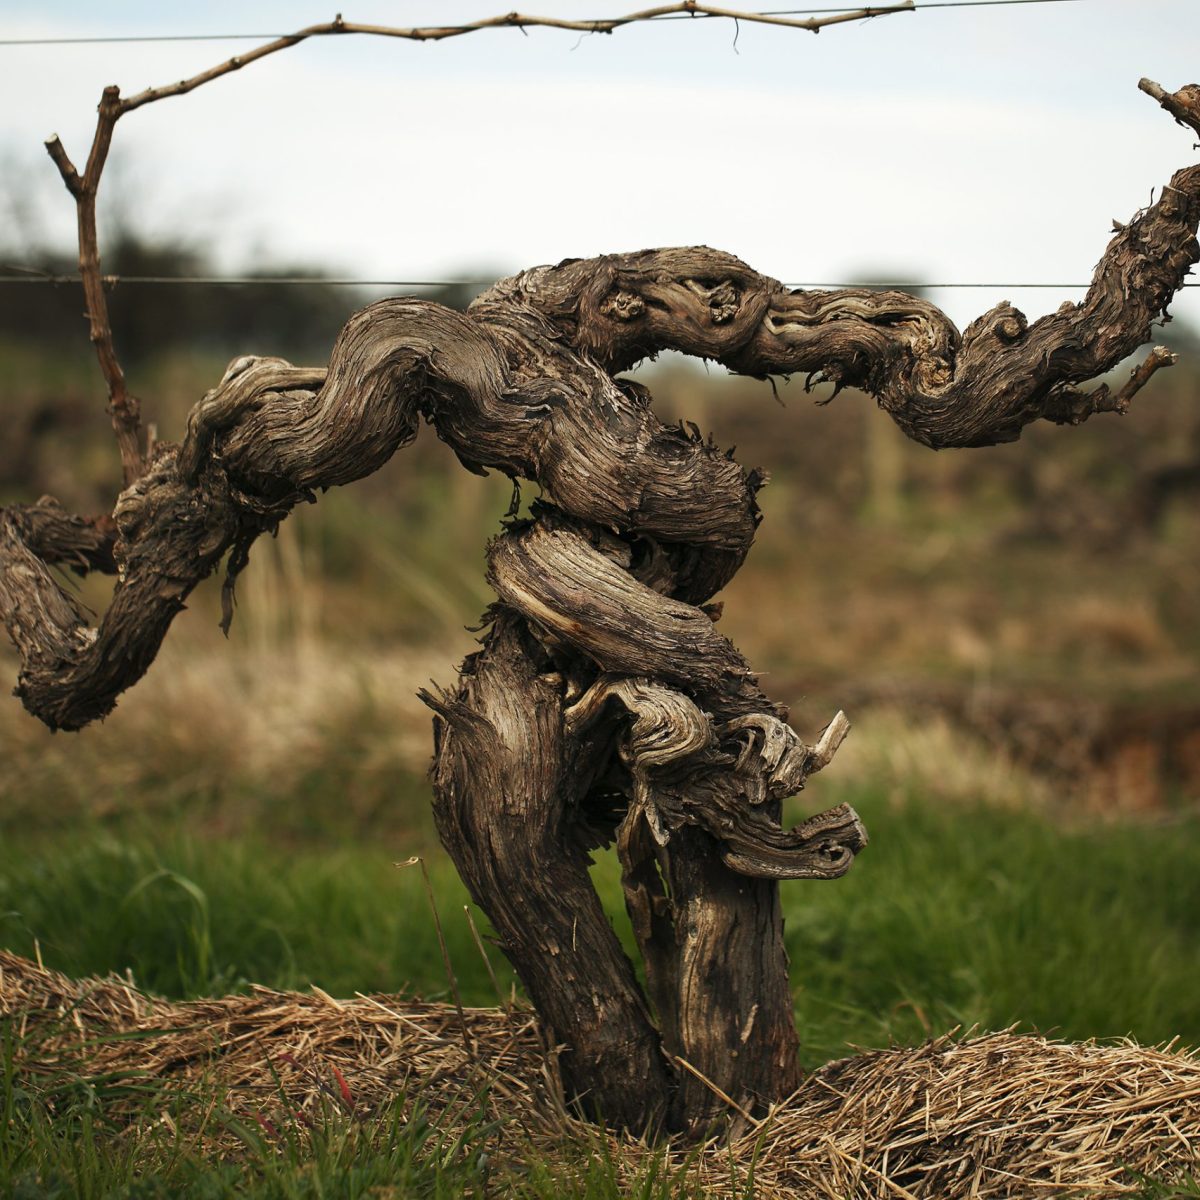 The Great Vine - the World's Oldest Grapevine? - Wine Alchemy